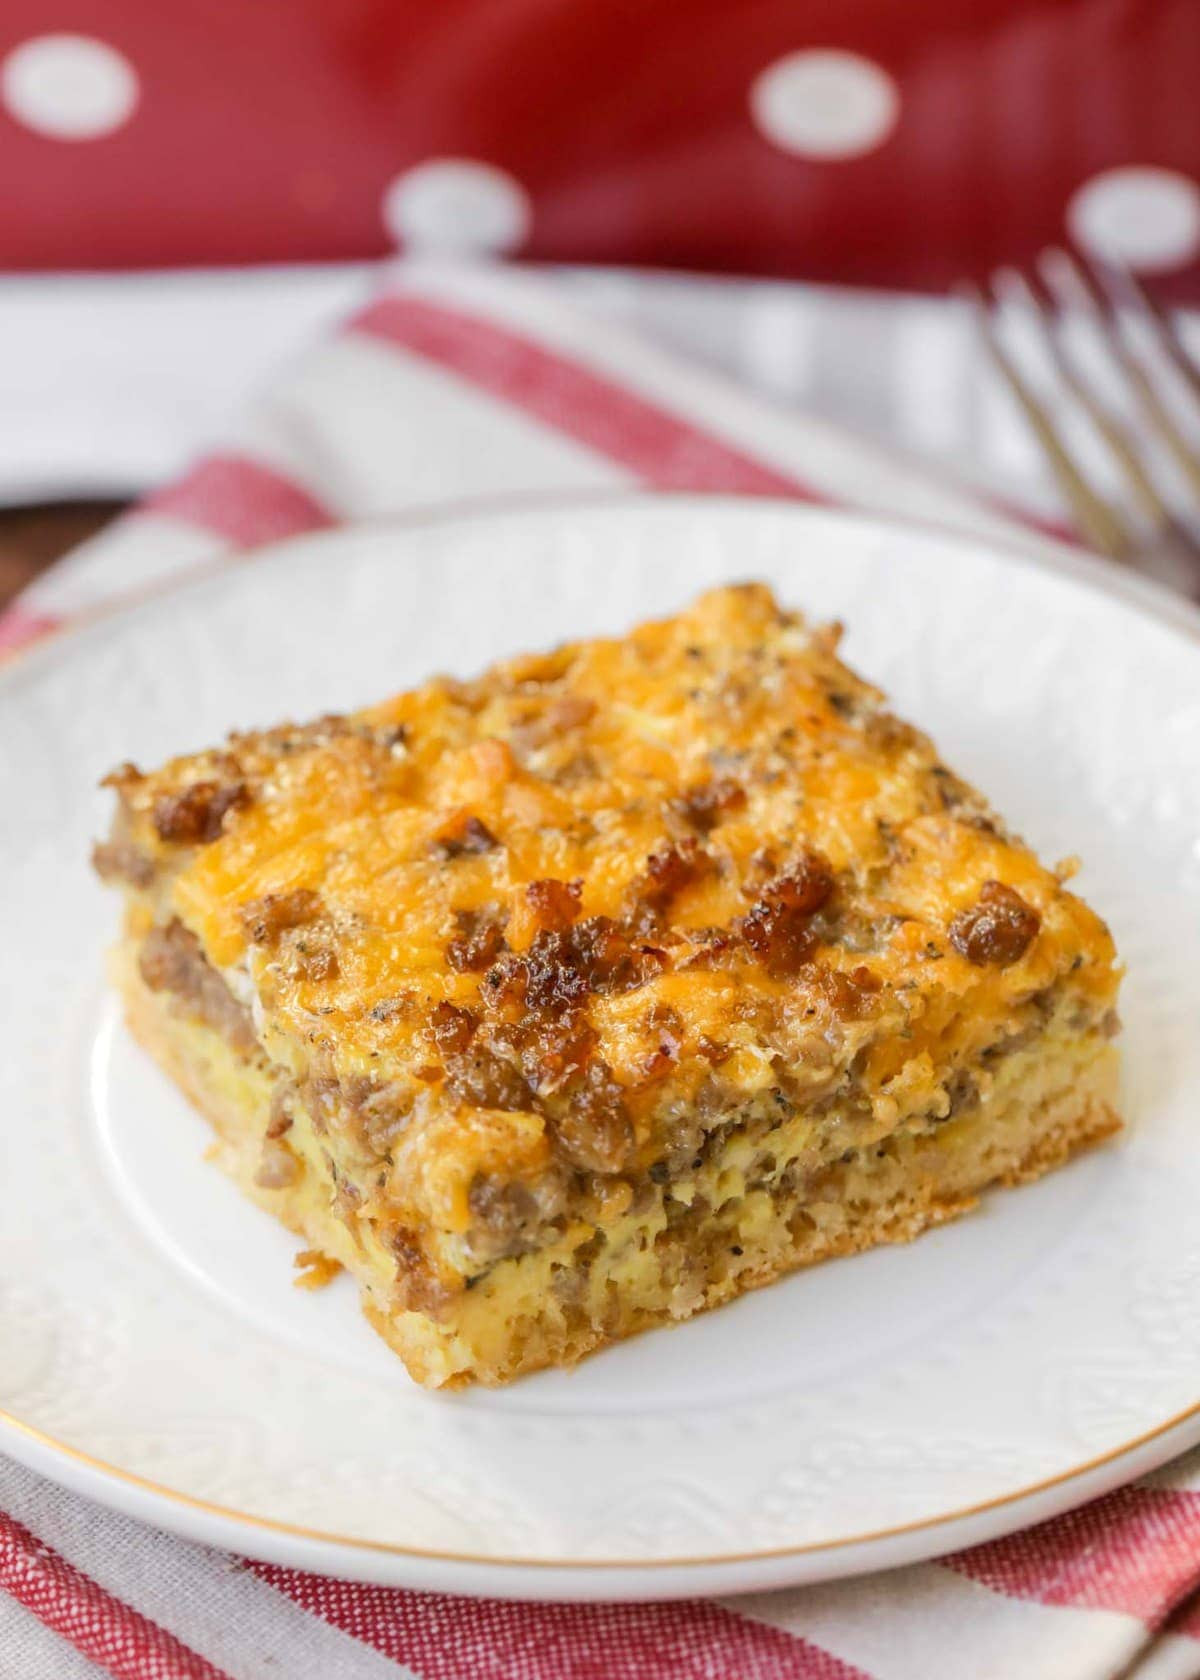 Recipe For Breakfast Casserole With Sausage
 Easy Sausage Breakfast Casserole 10 Minutes to Prep